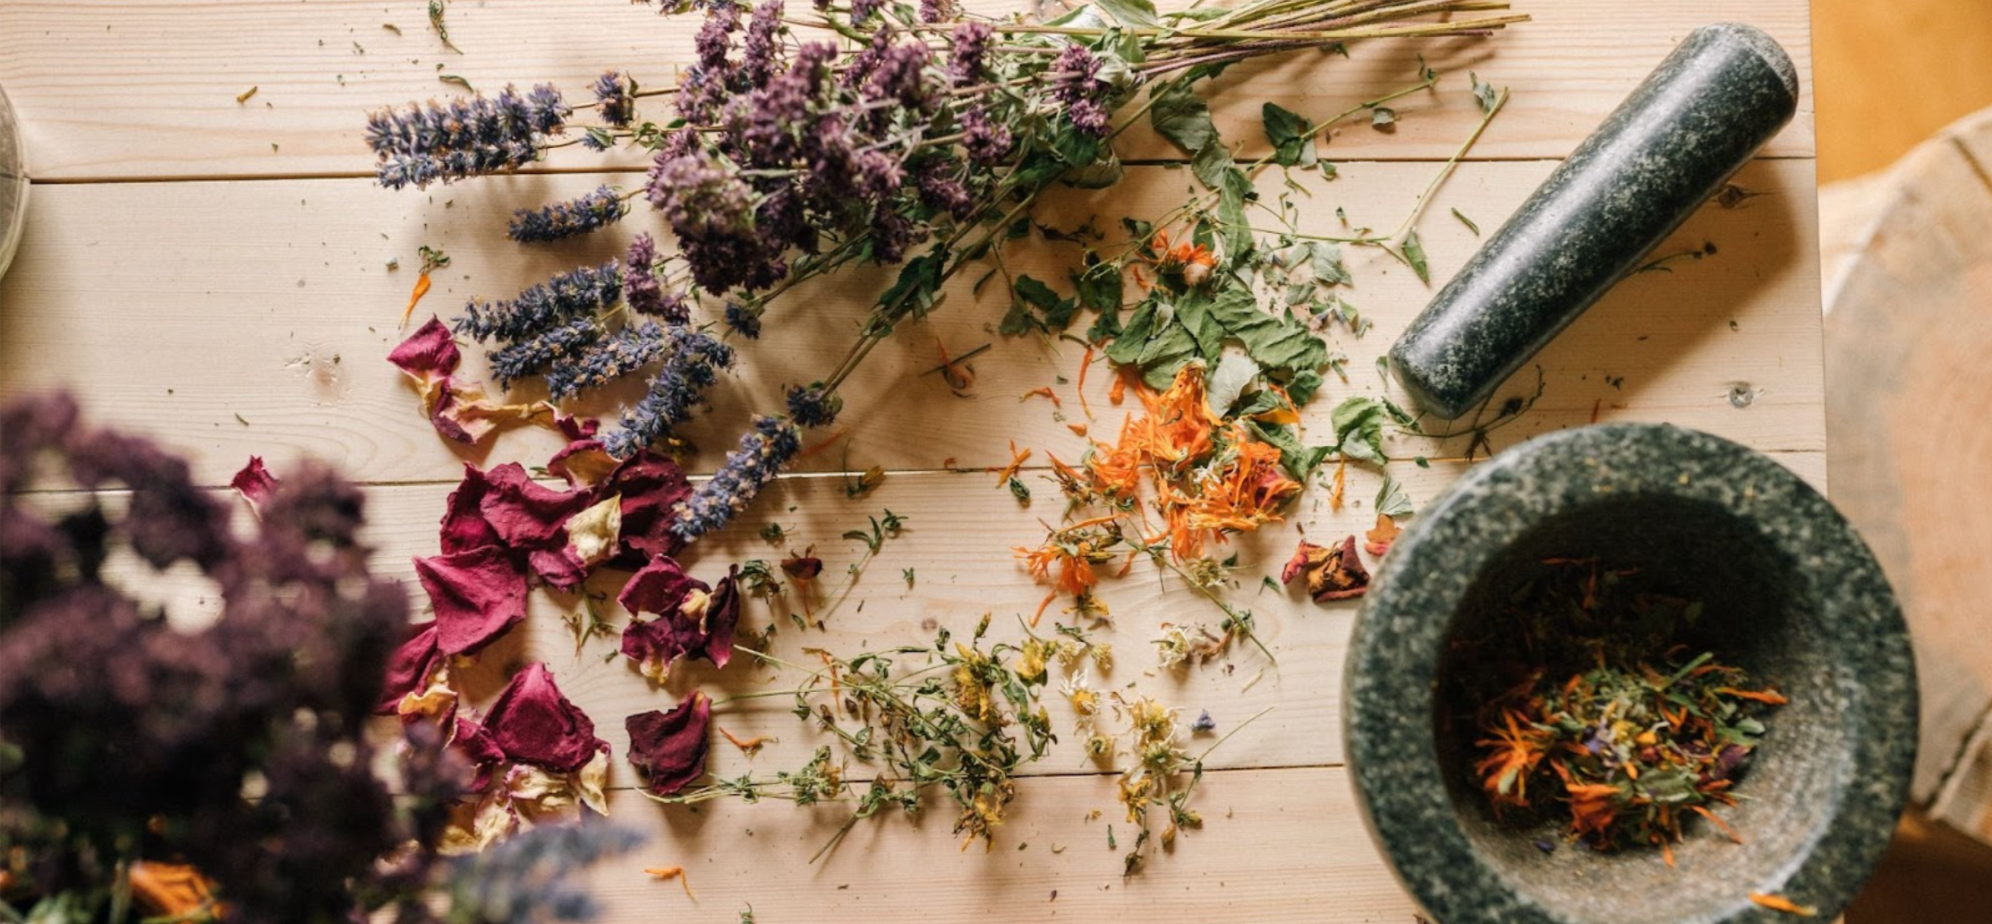 Dried herbs and flowers with a pestle and mortar